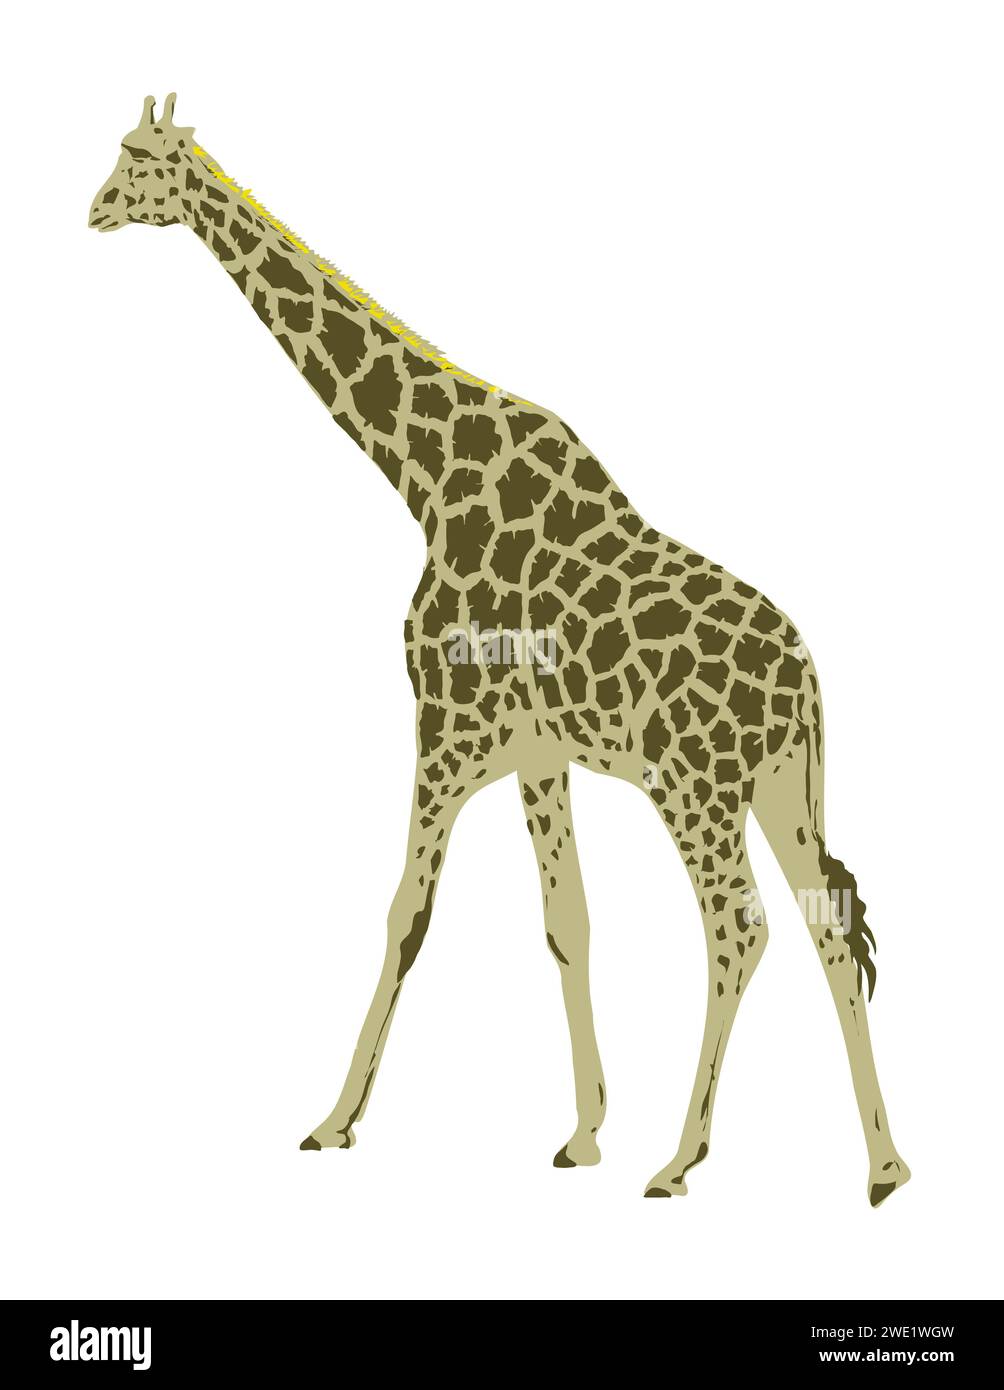 Art Deco or WPA poster of a giraffe or Giraffa camelopardalis viewed from side rear done in works project administration style. Stock Photo